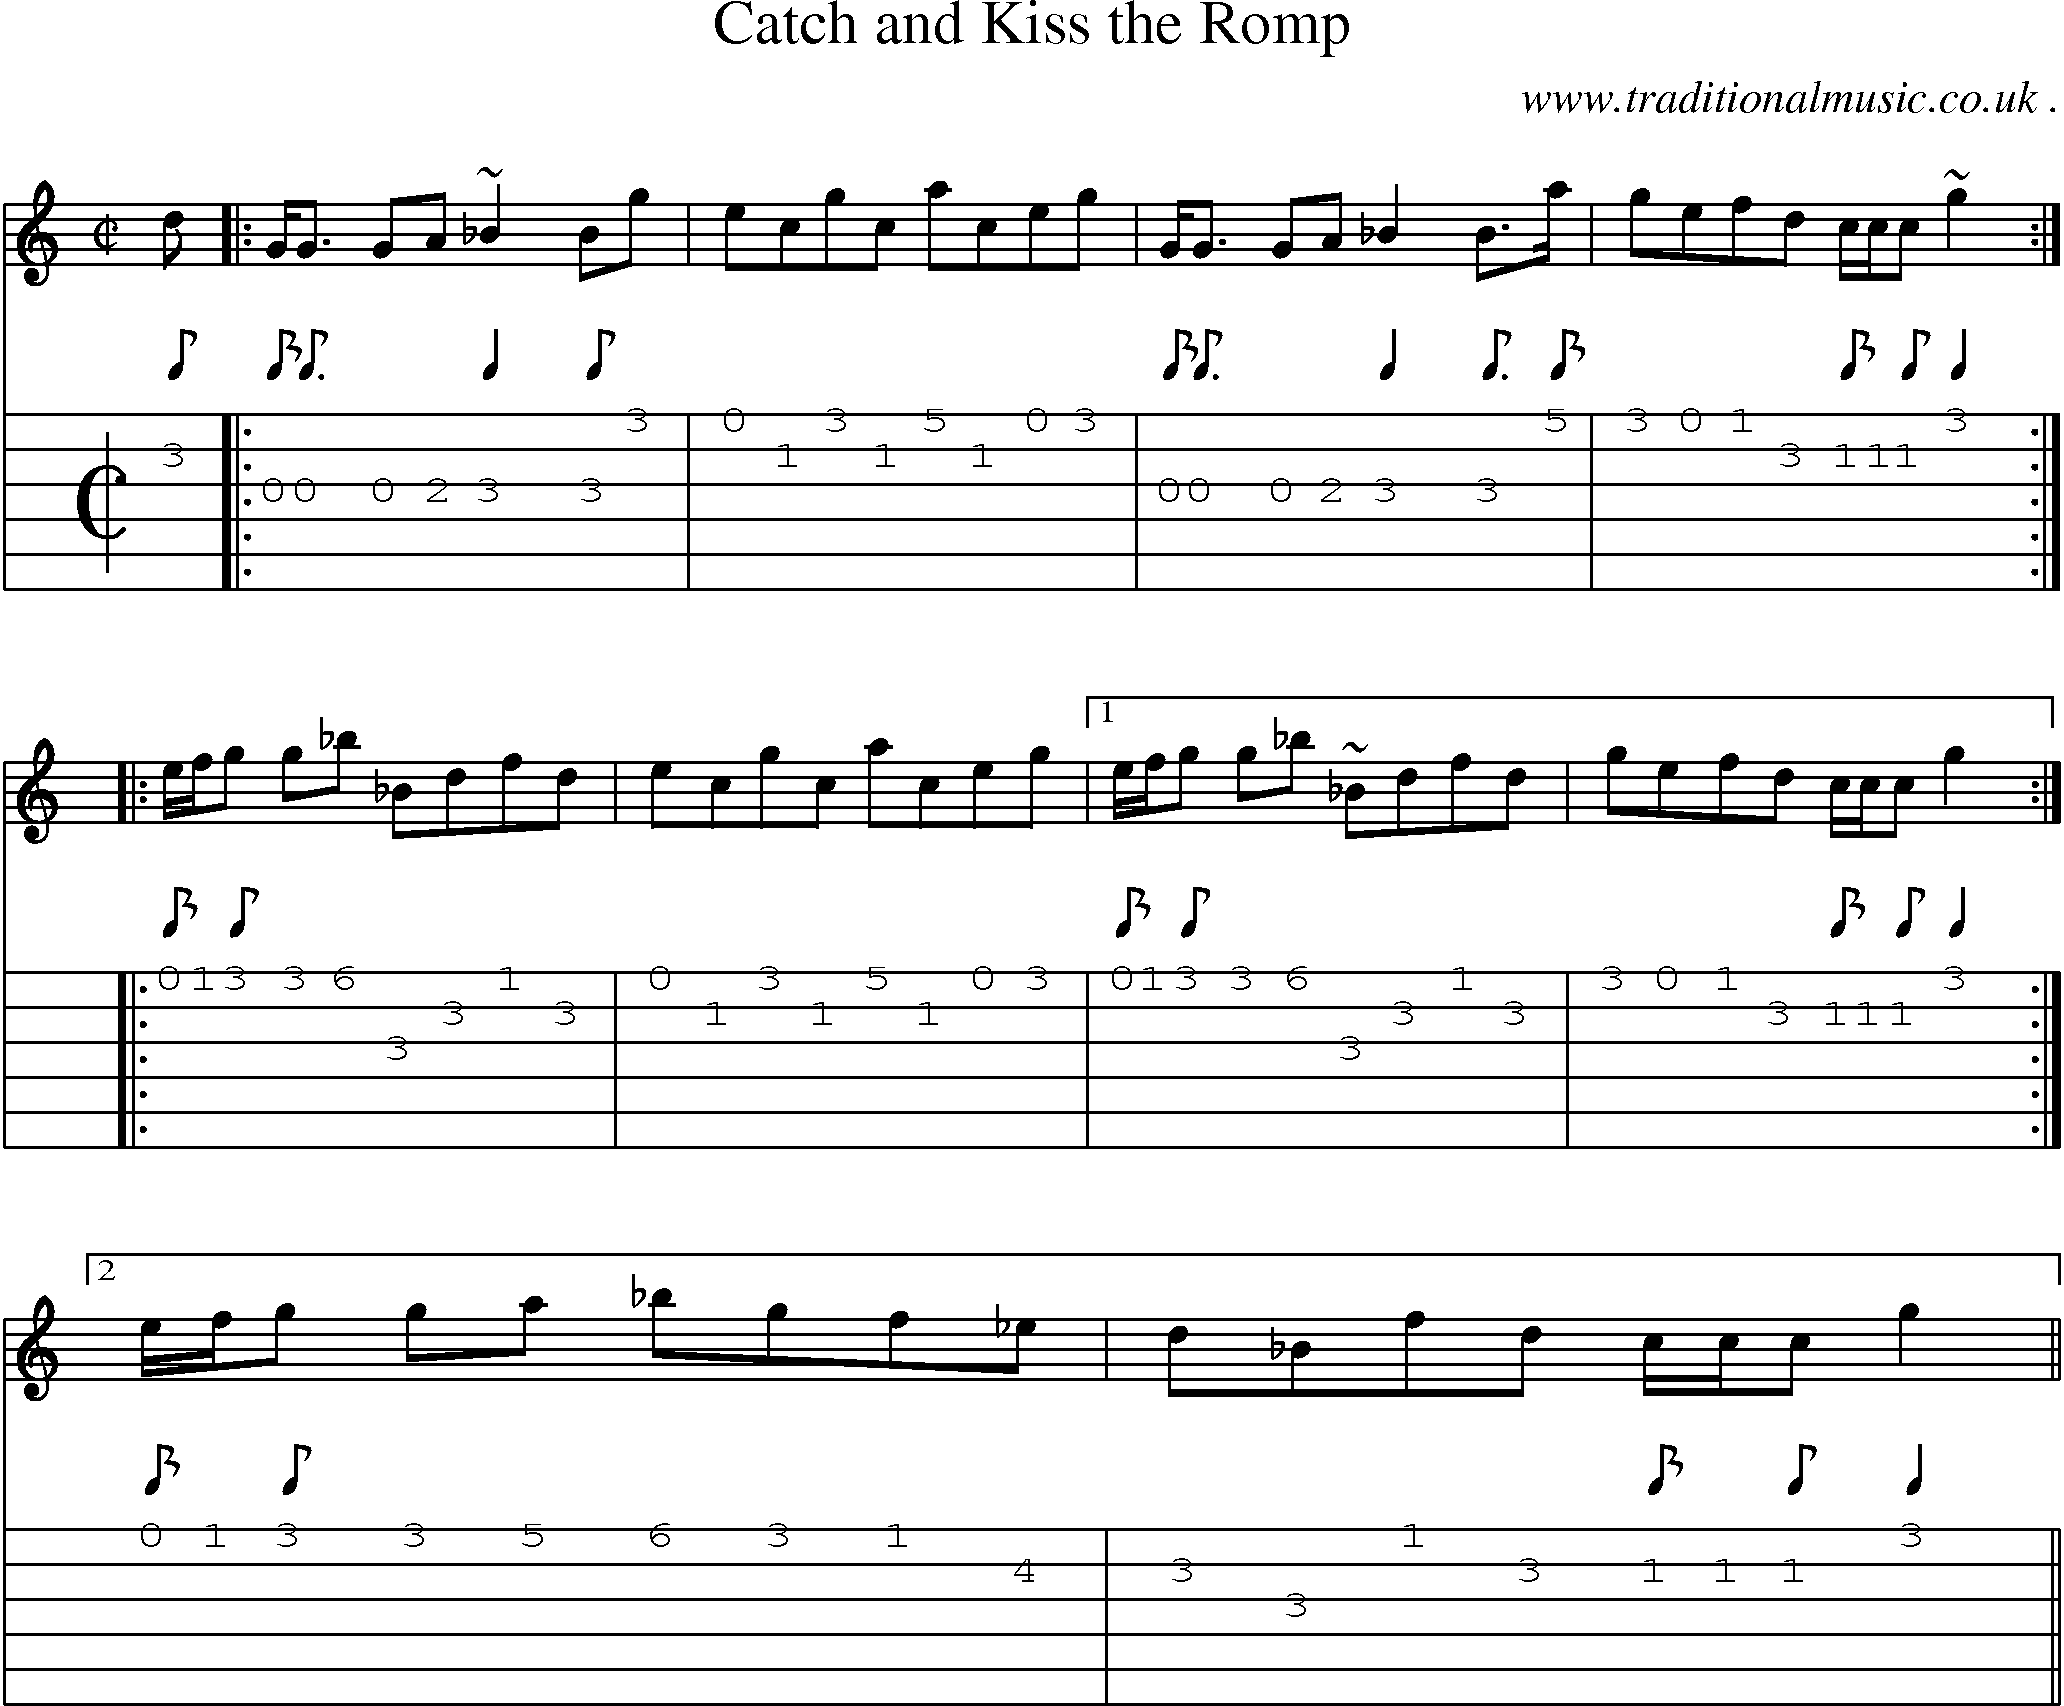 Sheet-music  score, Chords and Guitar Tabs for Catch And Kiss The Romp